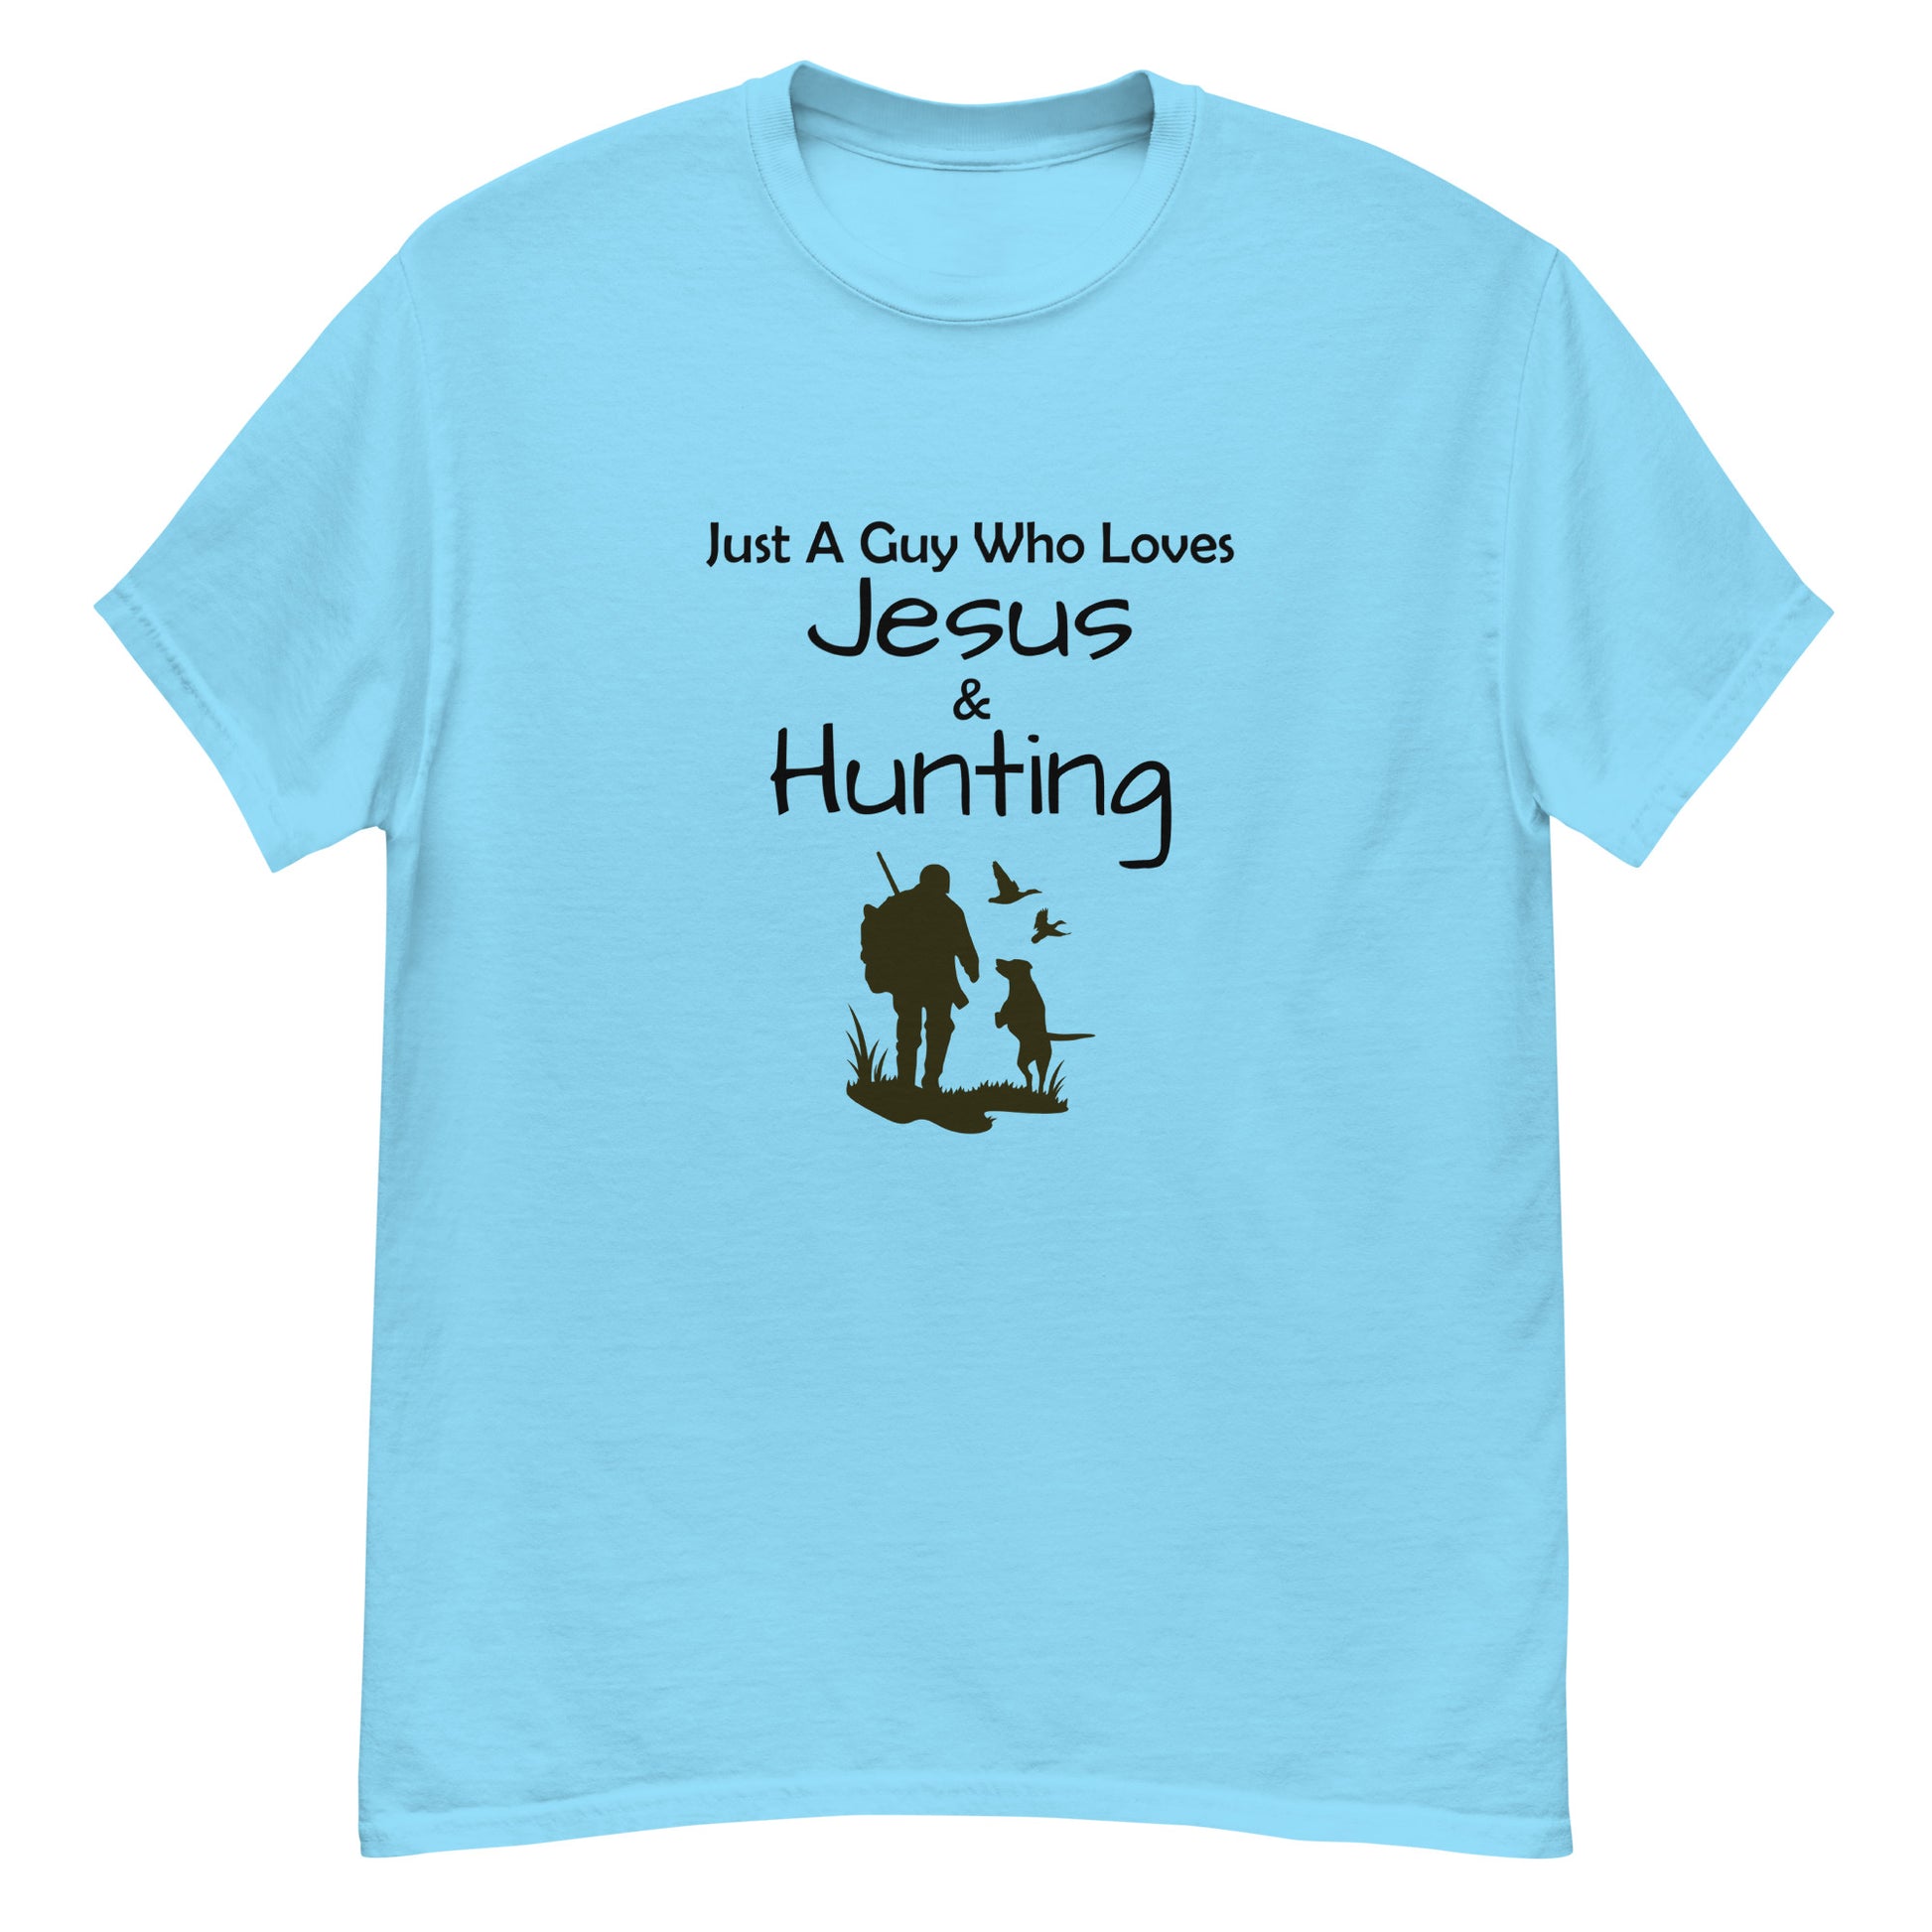 "Just A Guy Who Loves Jesus & Hunting" T-Shirt - Weave Got Gifts - Unique Gifts You Won’t Find Anywhere Else!